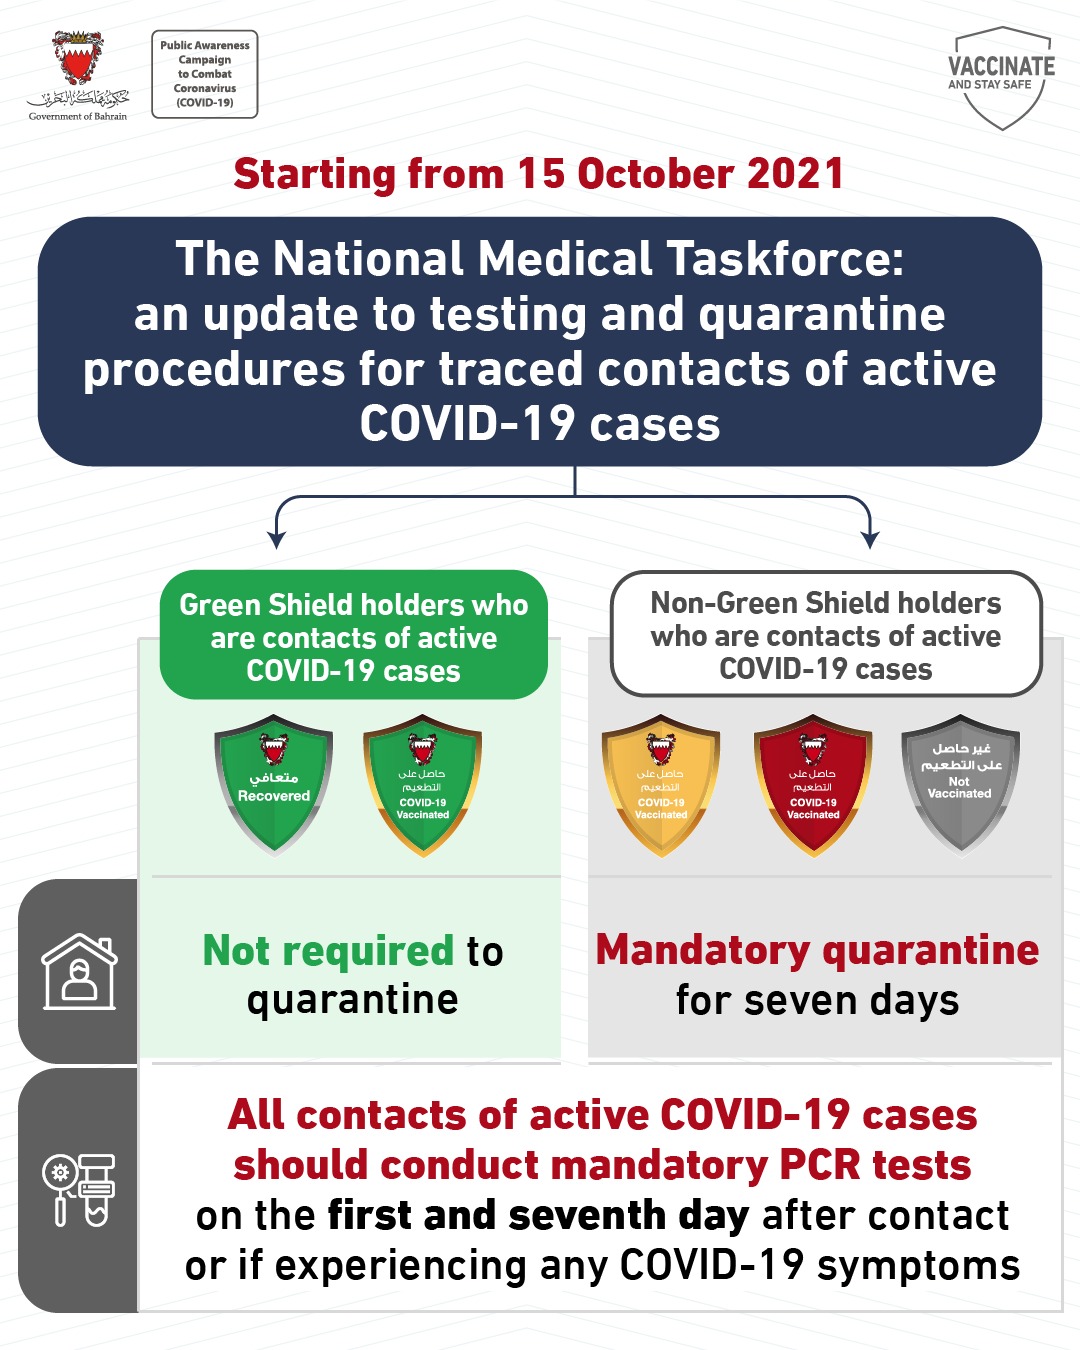 Quarantine not required for Green Shield holders who are contacts of active COVID-19 cases: 07 October 2021